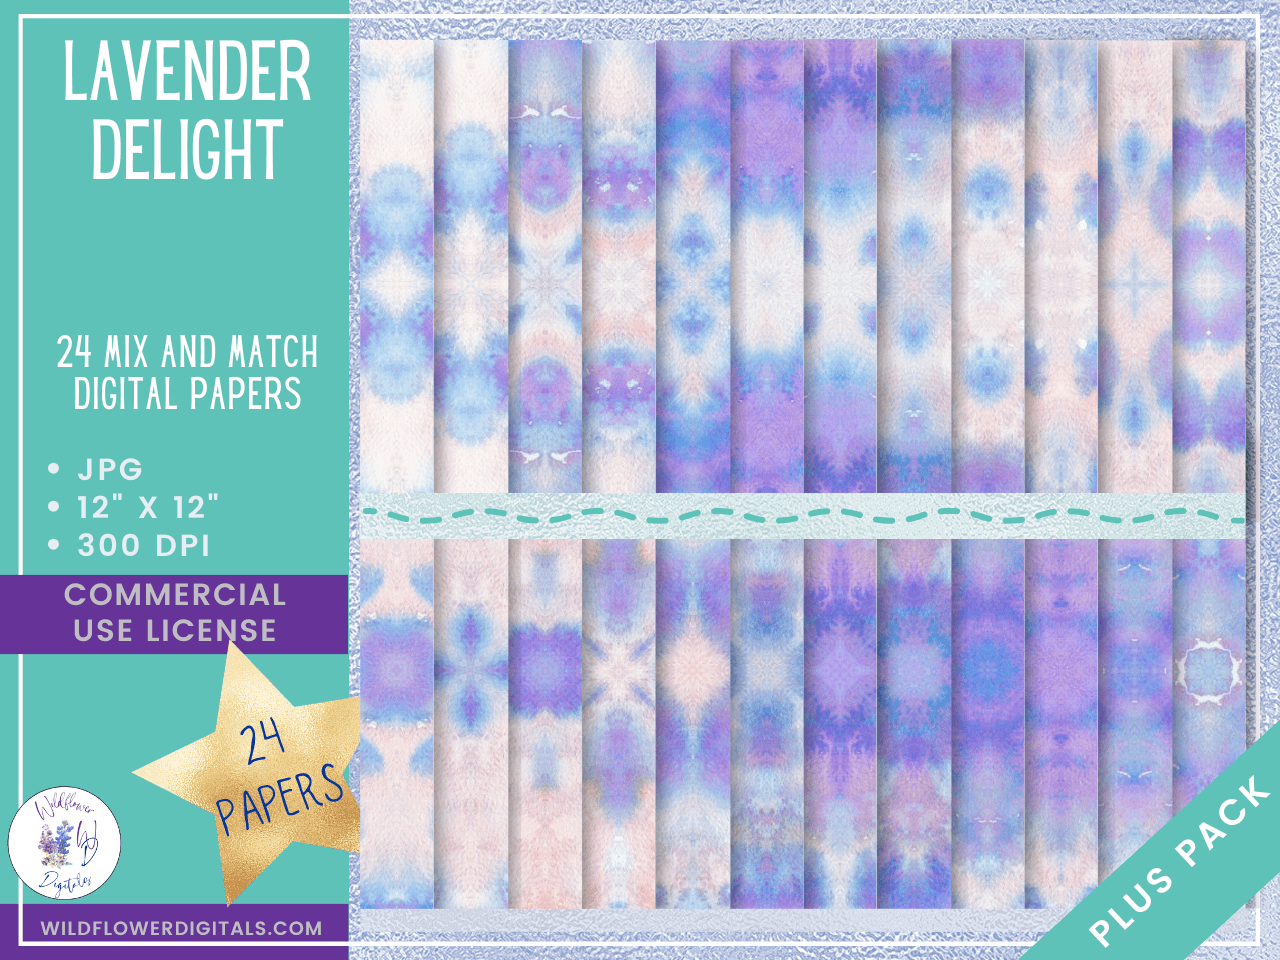 mockup of lavender delight digital papers mix and match papers